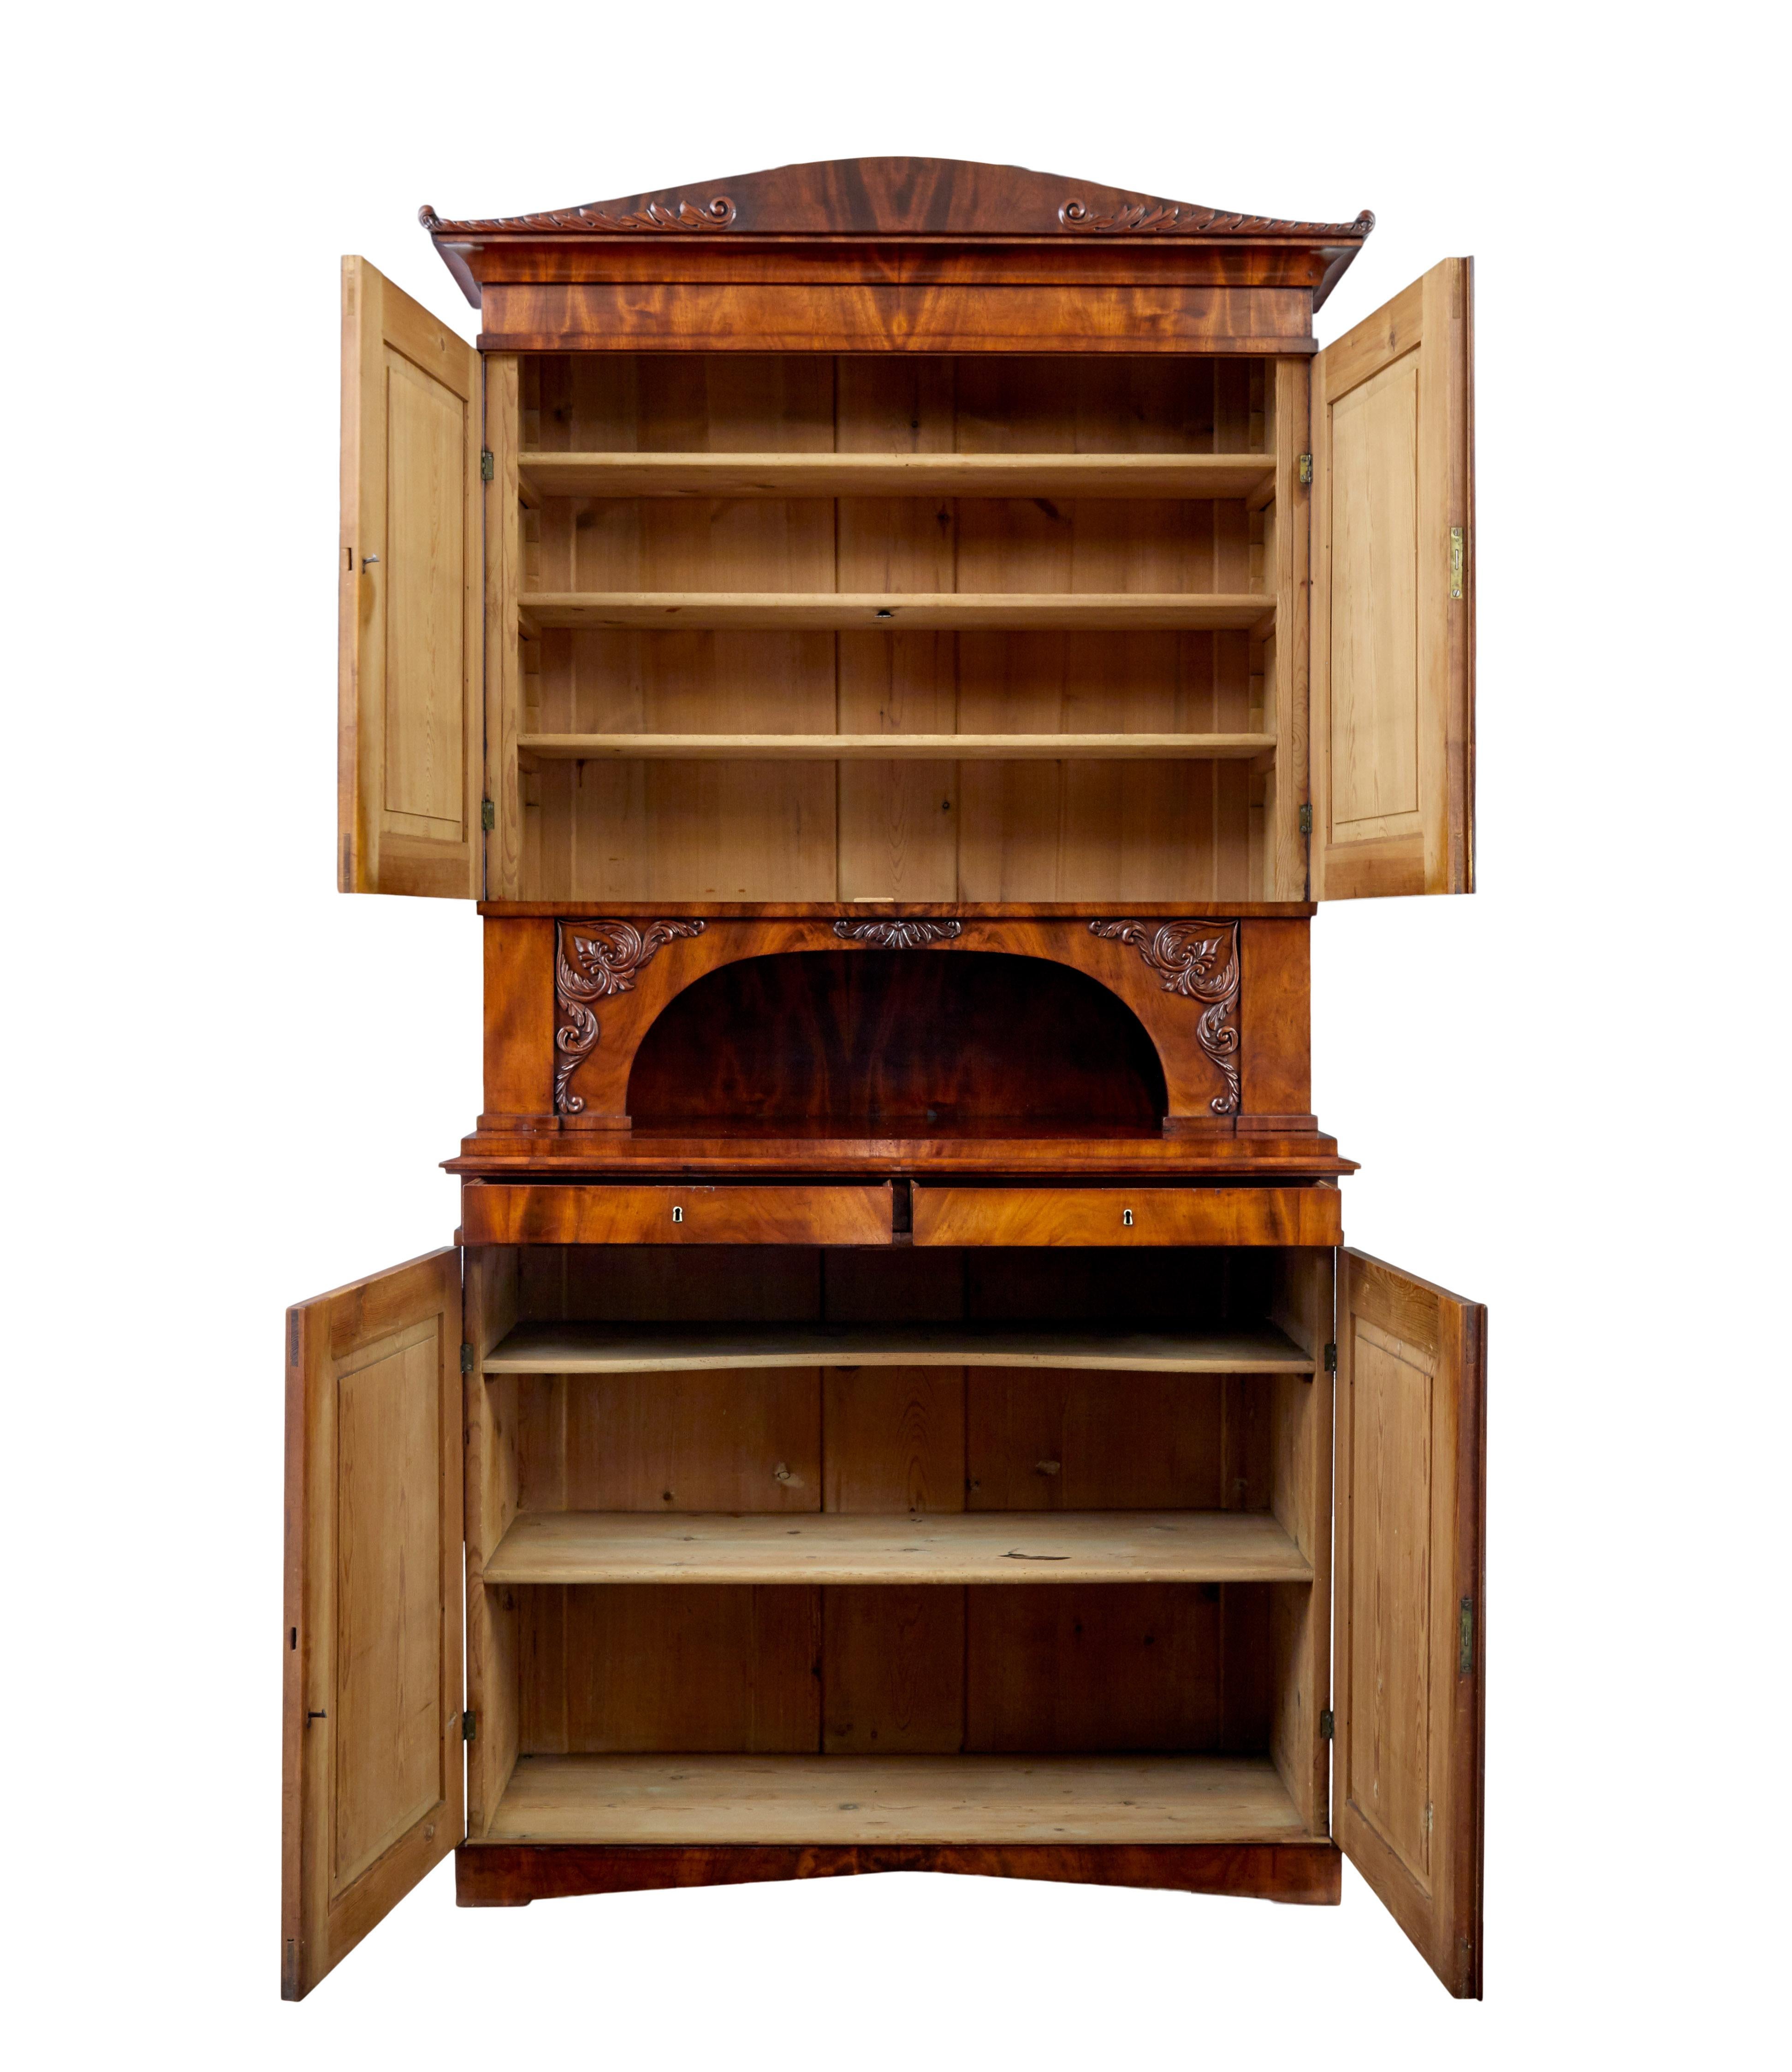 Good quality danish 2 part tall mahogany cabinet circa 1860.

Top section with scrolled cornice and applied swags, double doors with shaped panels open to reveal 3 adjustable pine shelves.  Below this an open display aperture with further applied